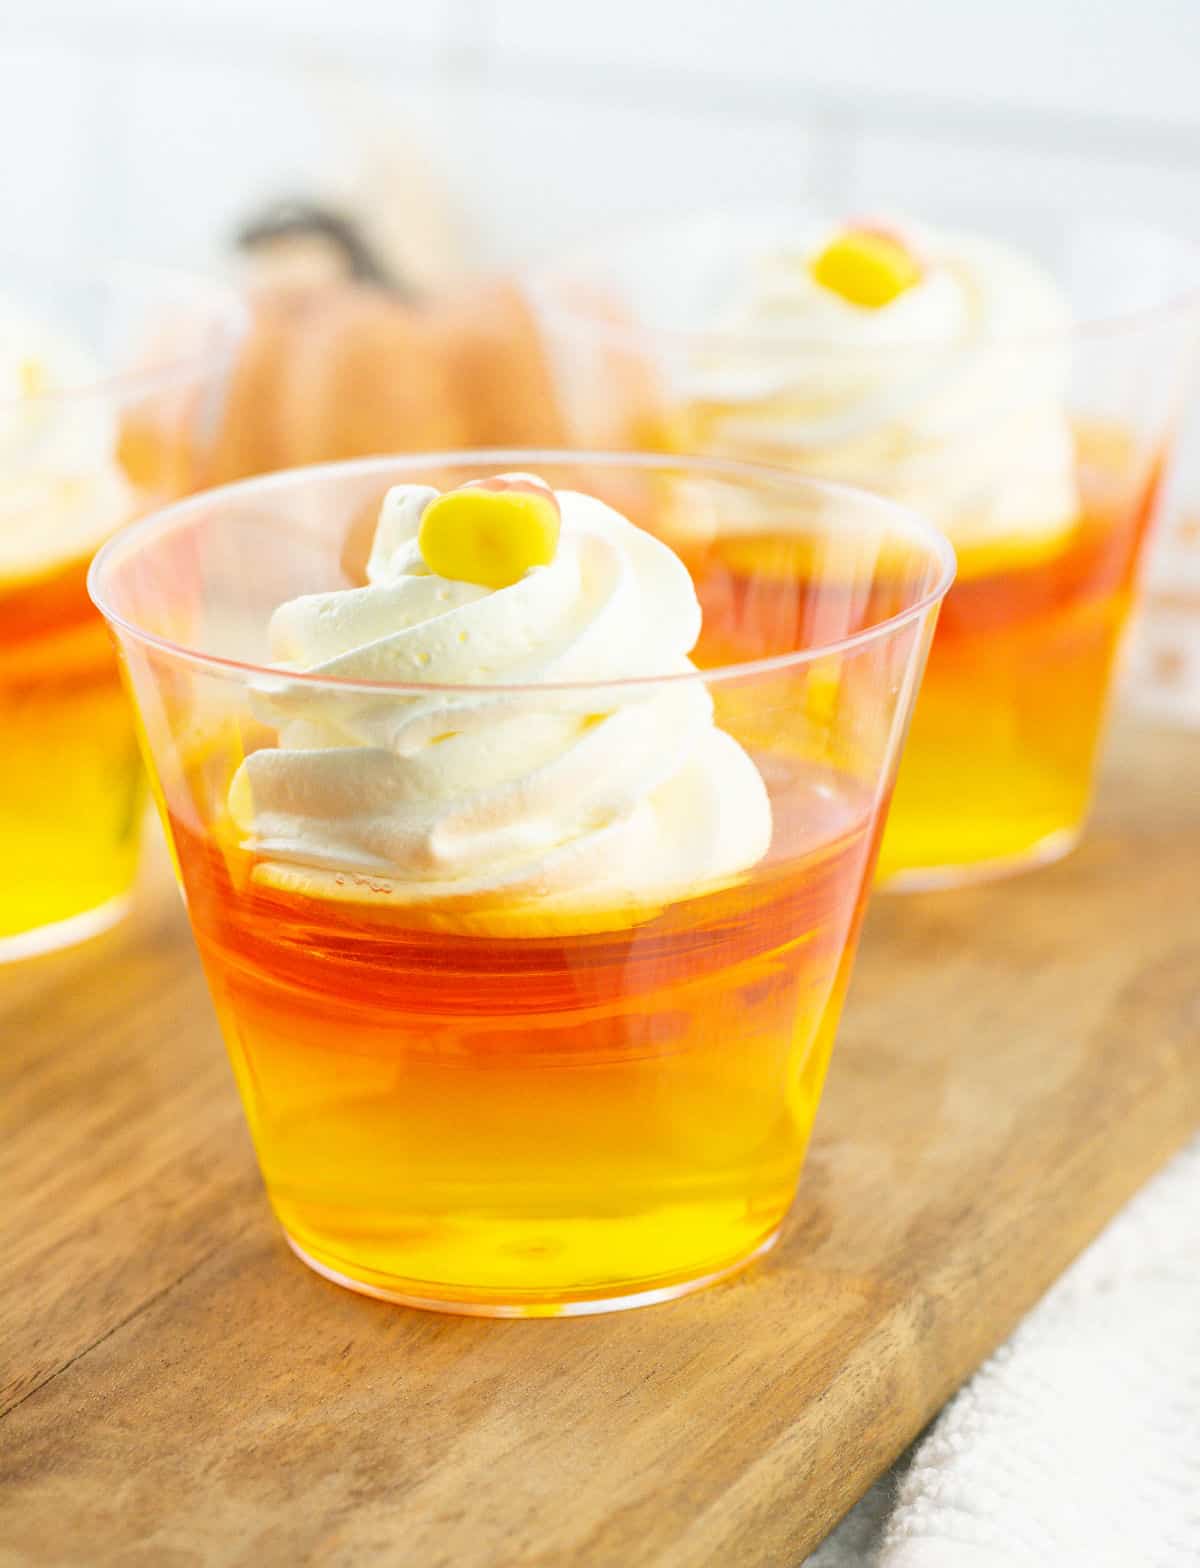 Cups of orange and yellow jello cups with a dollop of whipped cream. Wooden board surface. 